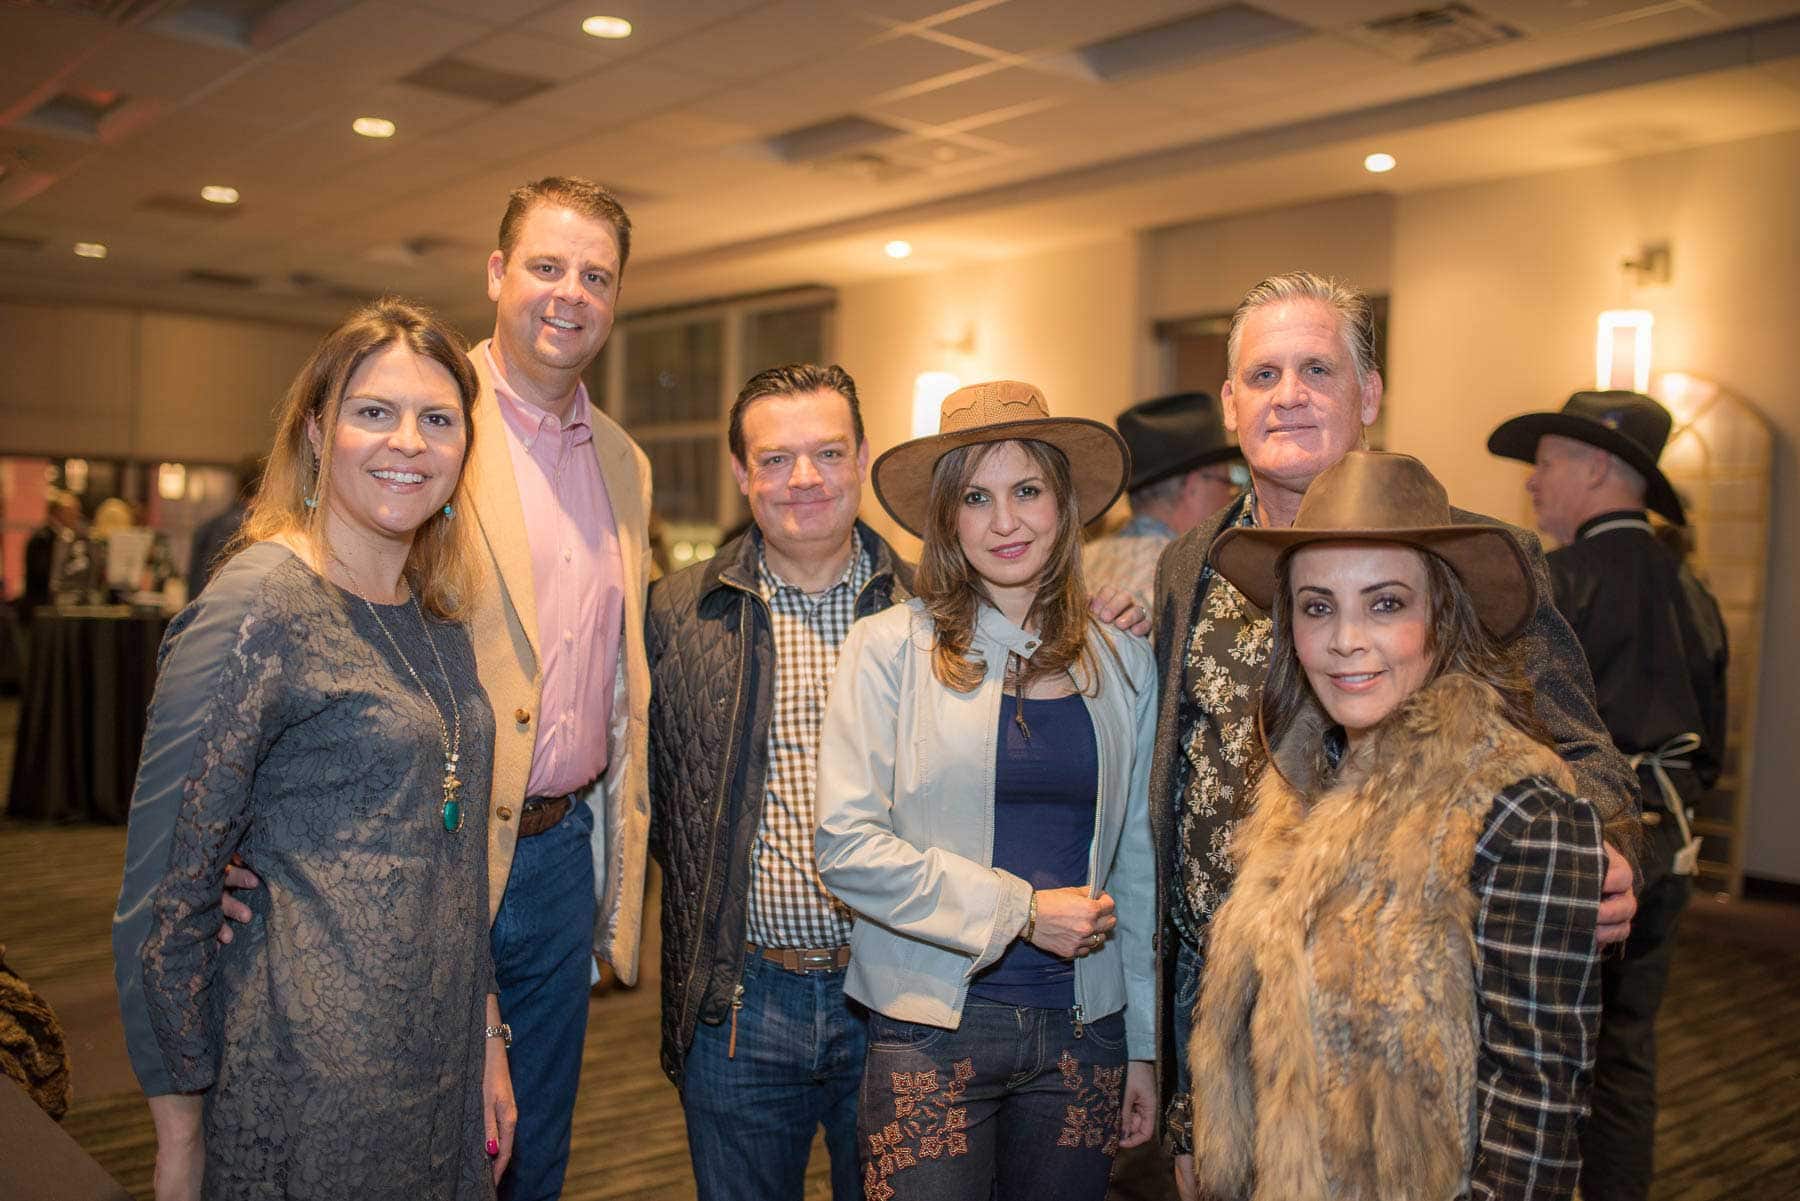 Gala event photography after the Rodeo